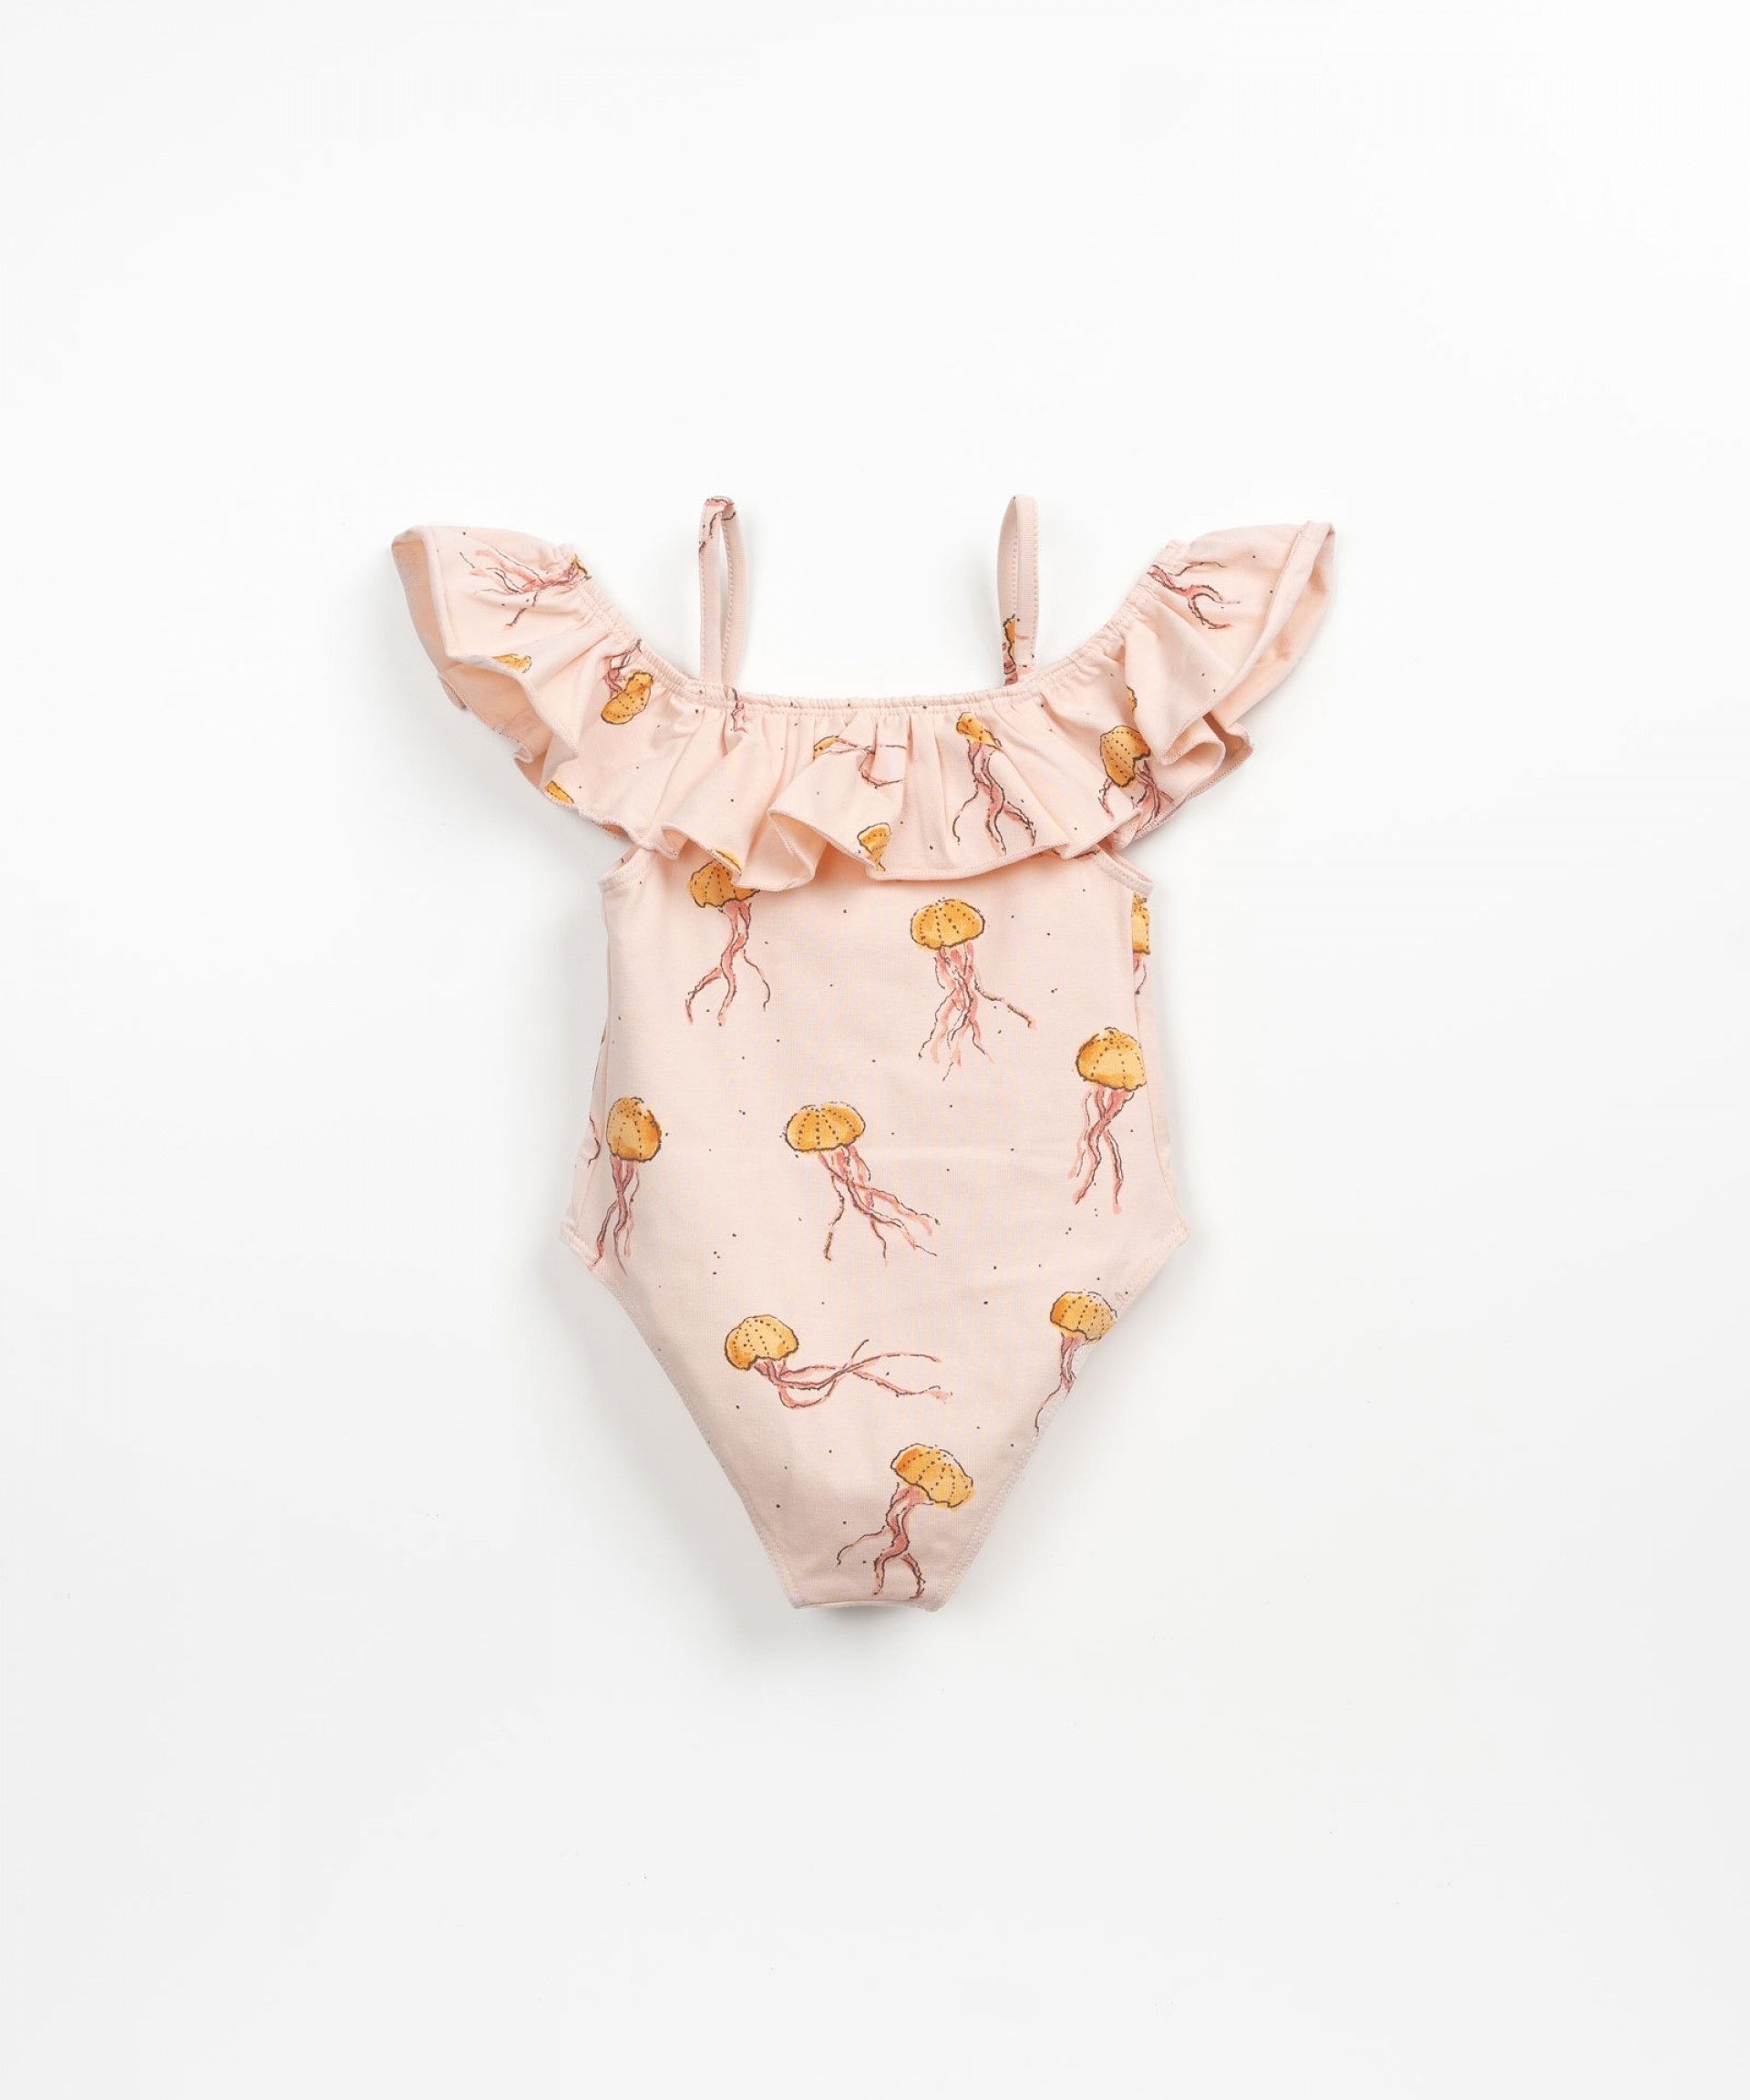 Swimsuit with jellyfish print | Textile Art